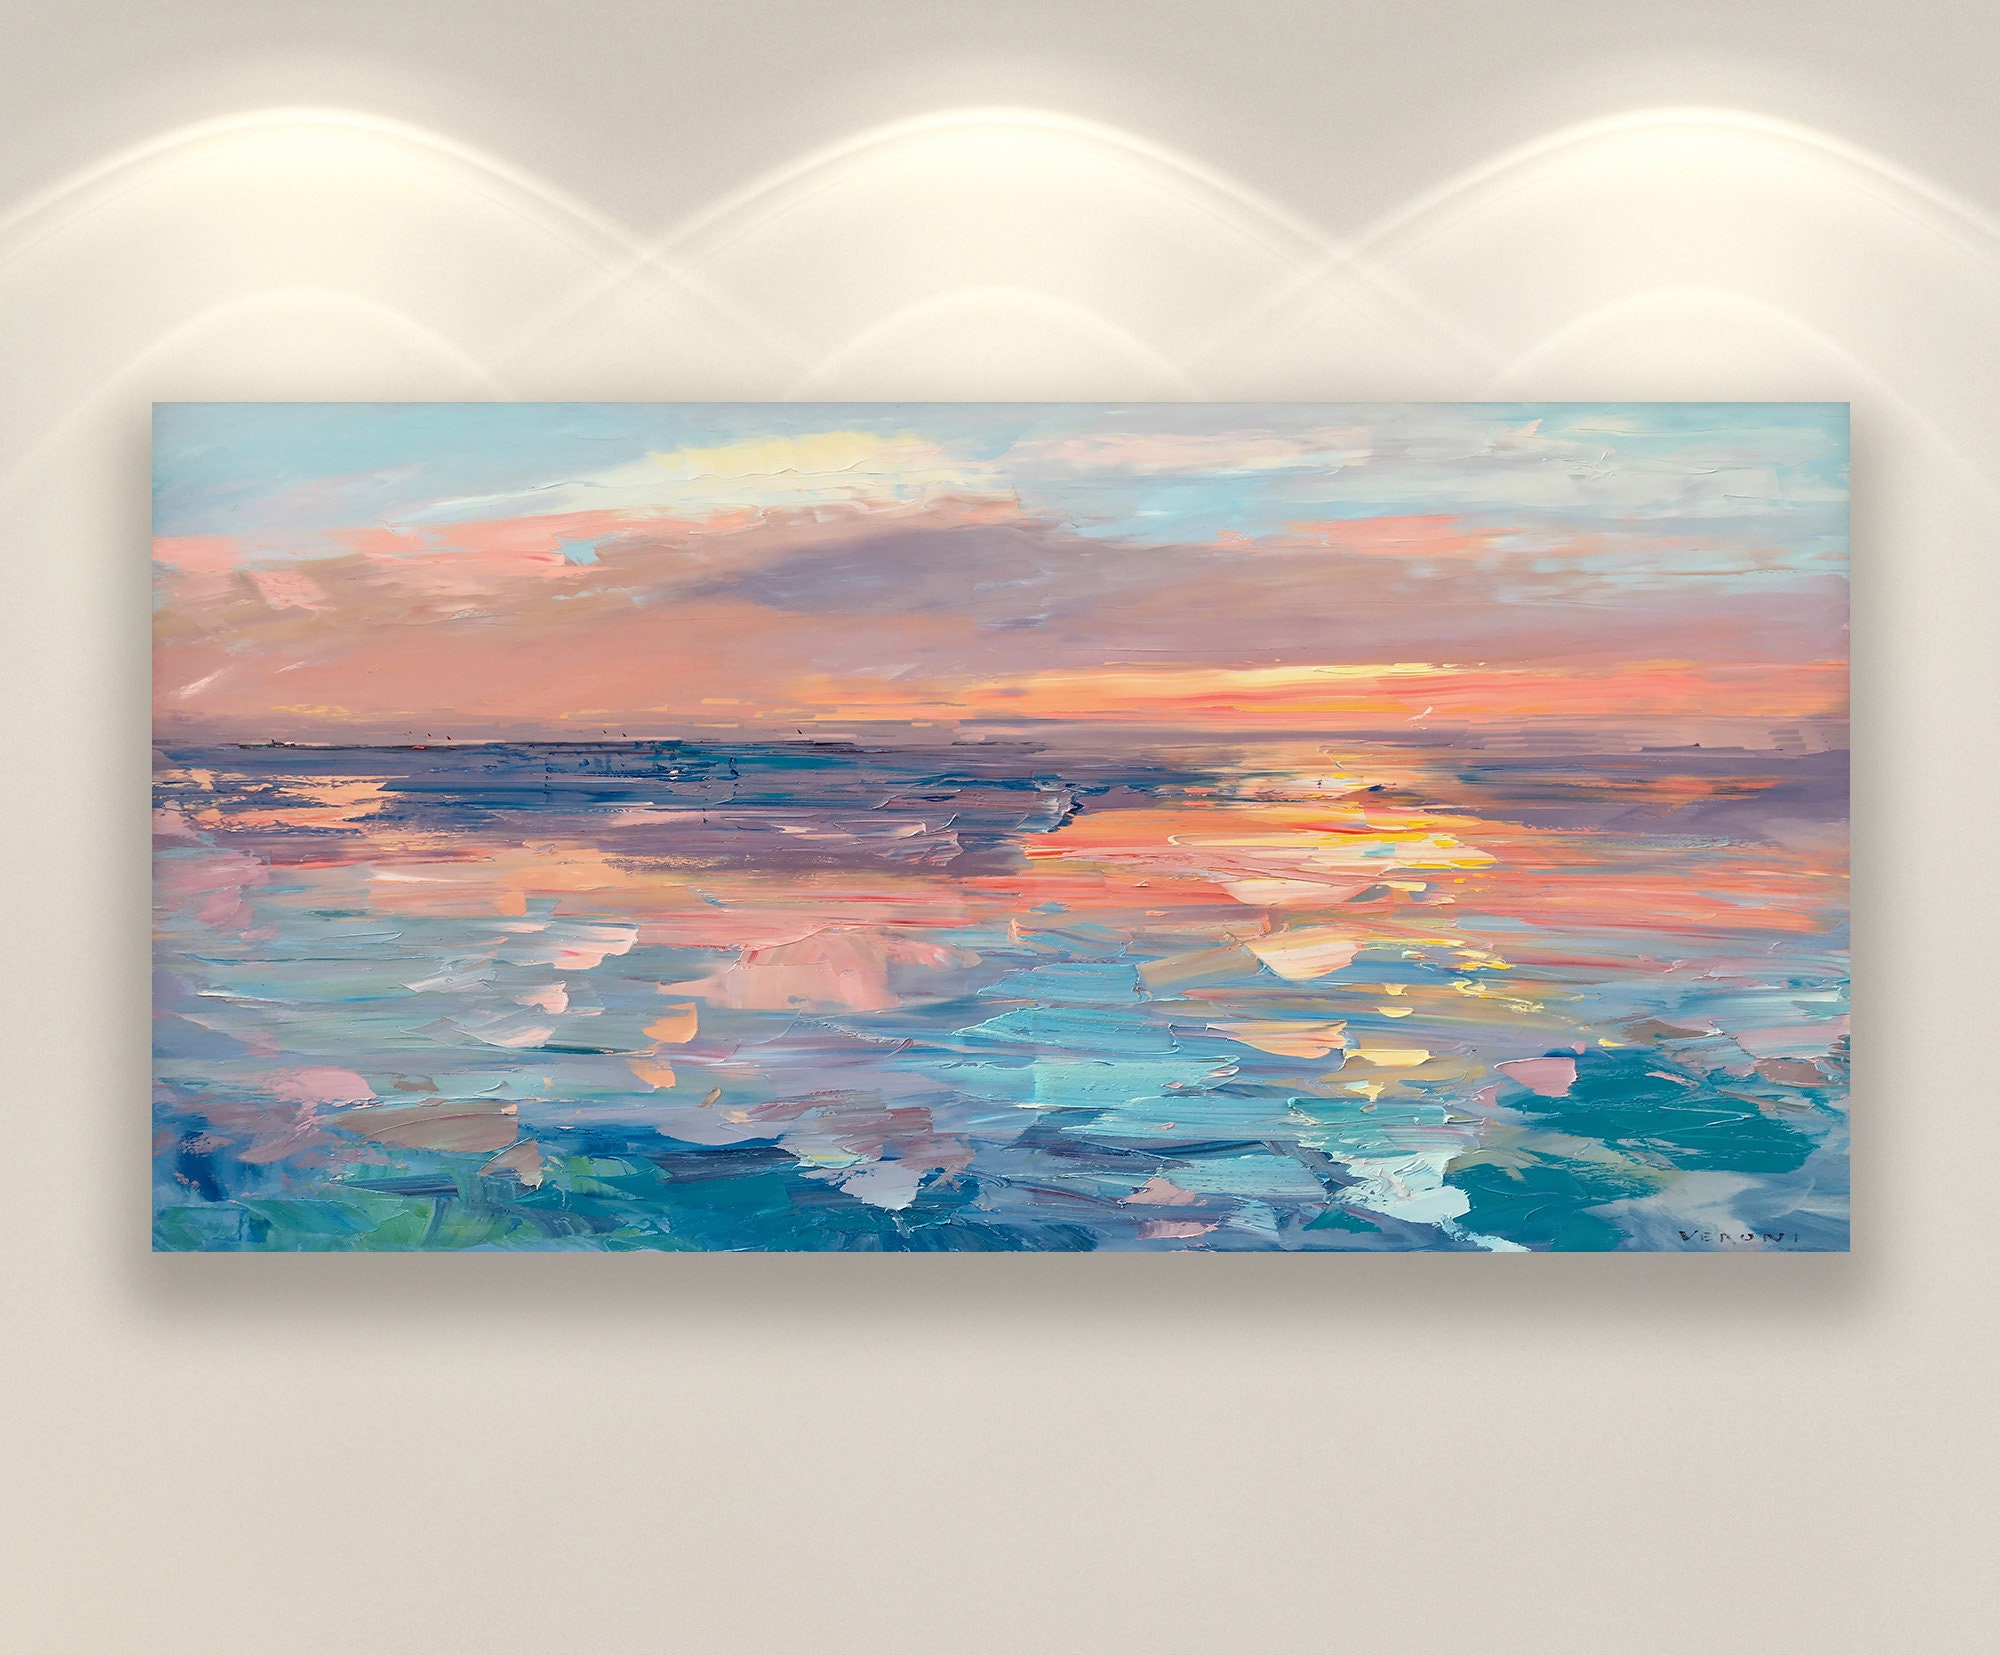 Padsin Art Sunset Square Canvas Wall Art Painting Ocean Waves Print on Canvas Painting Modern Seascape Ready to Hang for Home Living Room Bedroom Decoration